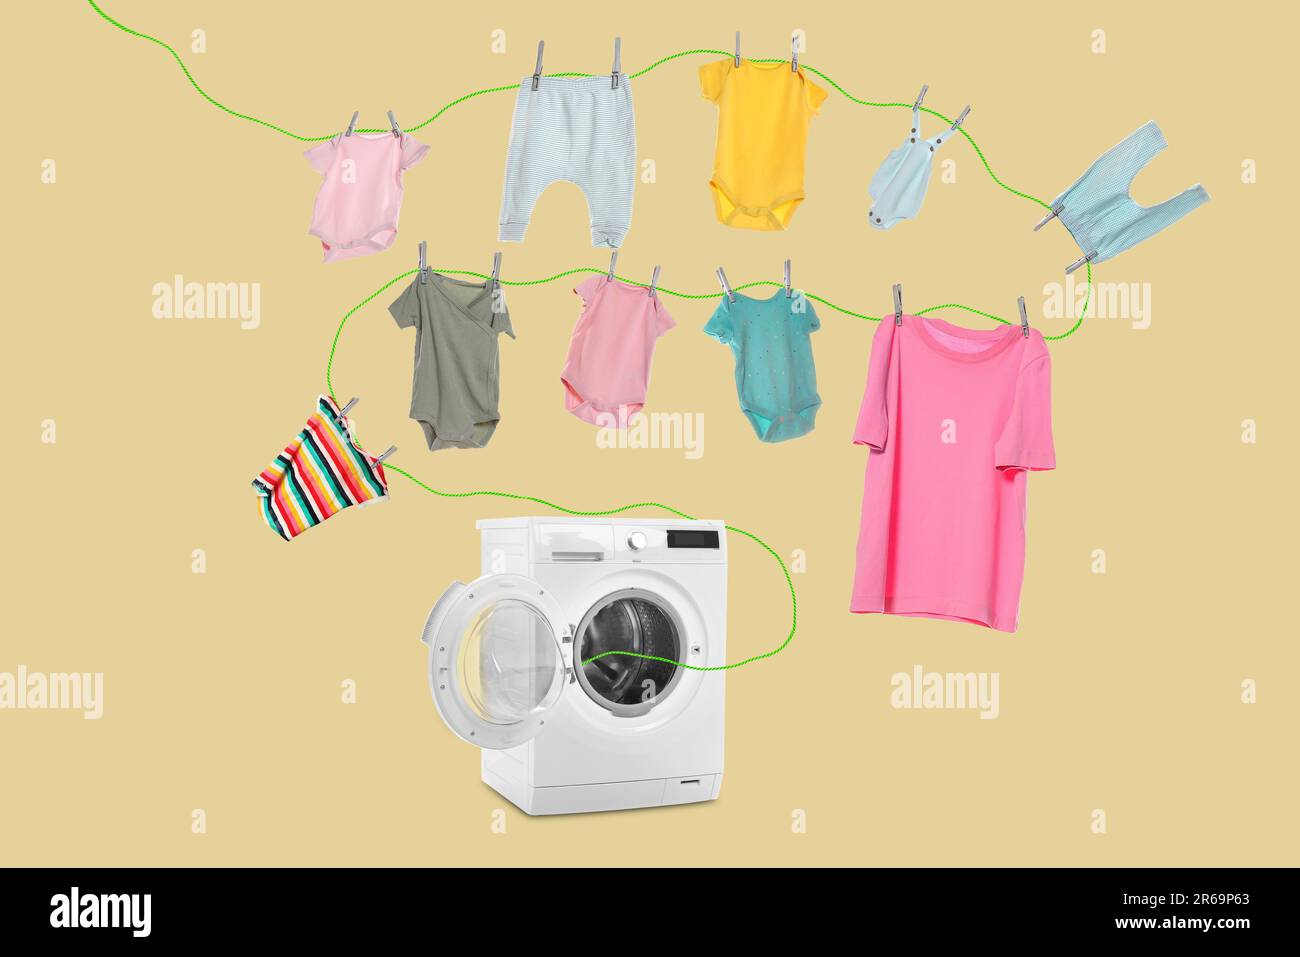 Drying laundry. Rope with children clothes flying out from washing machine on beige background Stock Photo